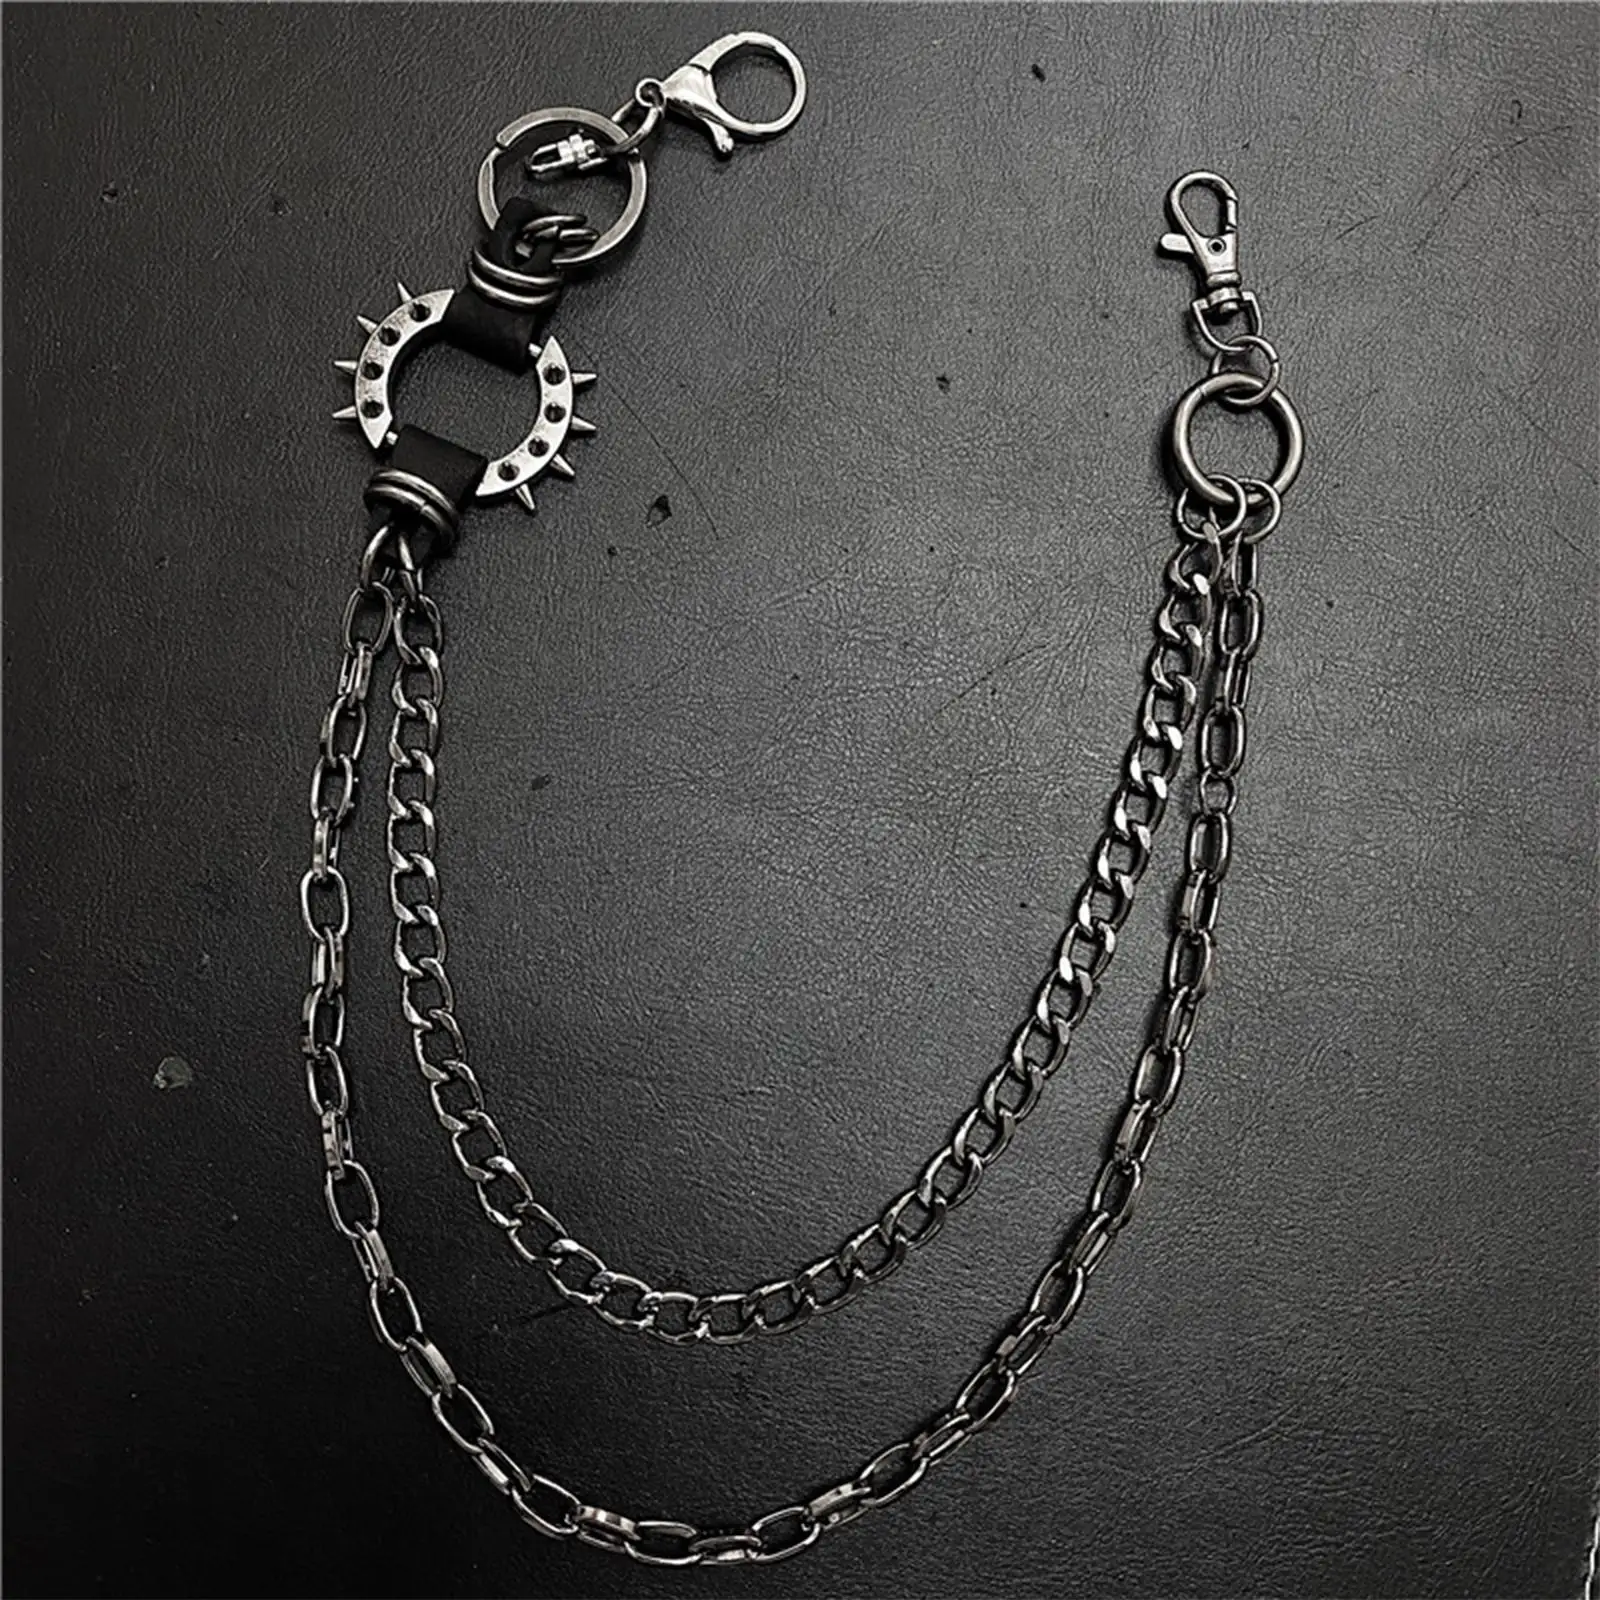 Waist Chain Black with 2 Way Tracking Punk Style Cool Vintage Fashion Unisex Keychain Wallet Chains for Men Goth Punk Trousers